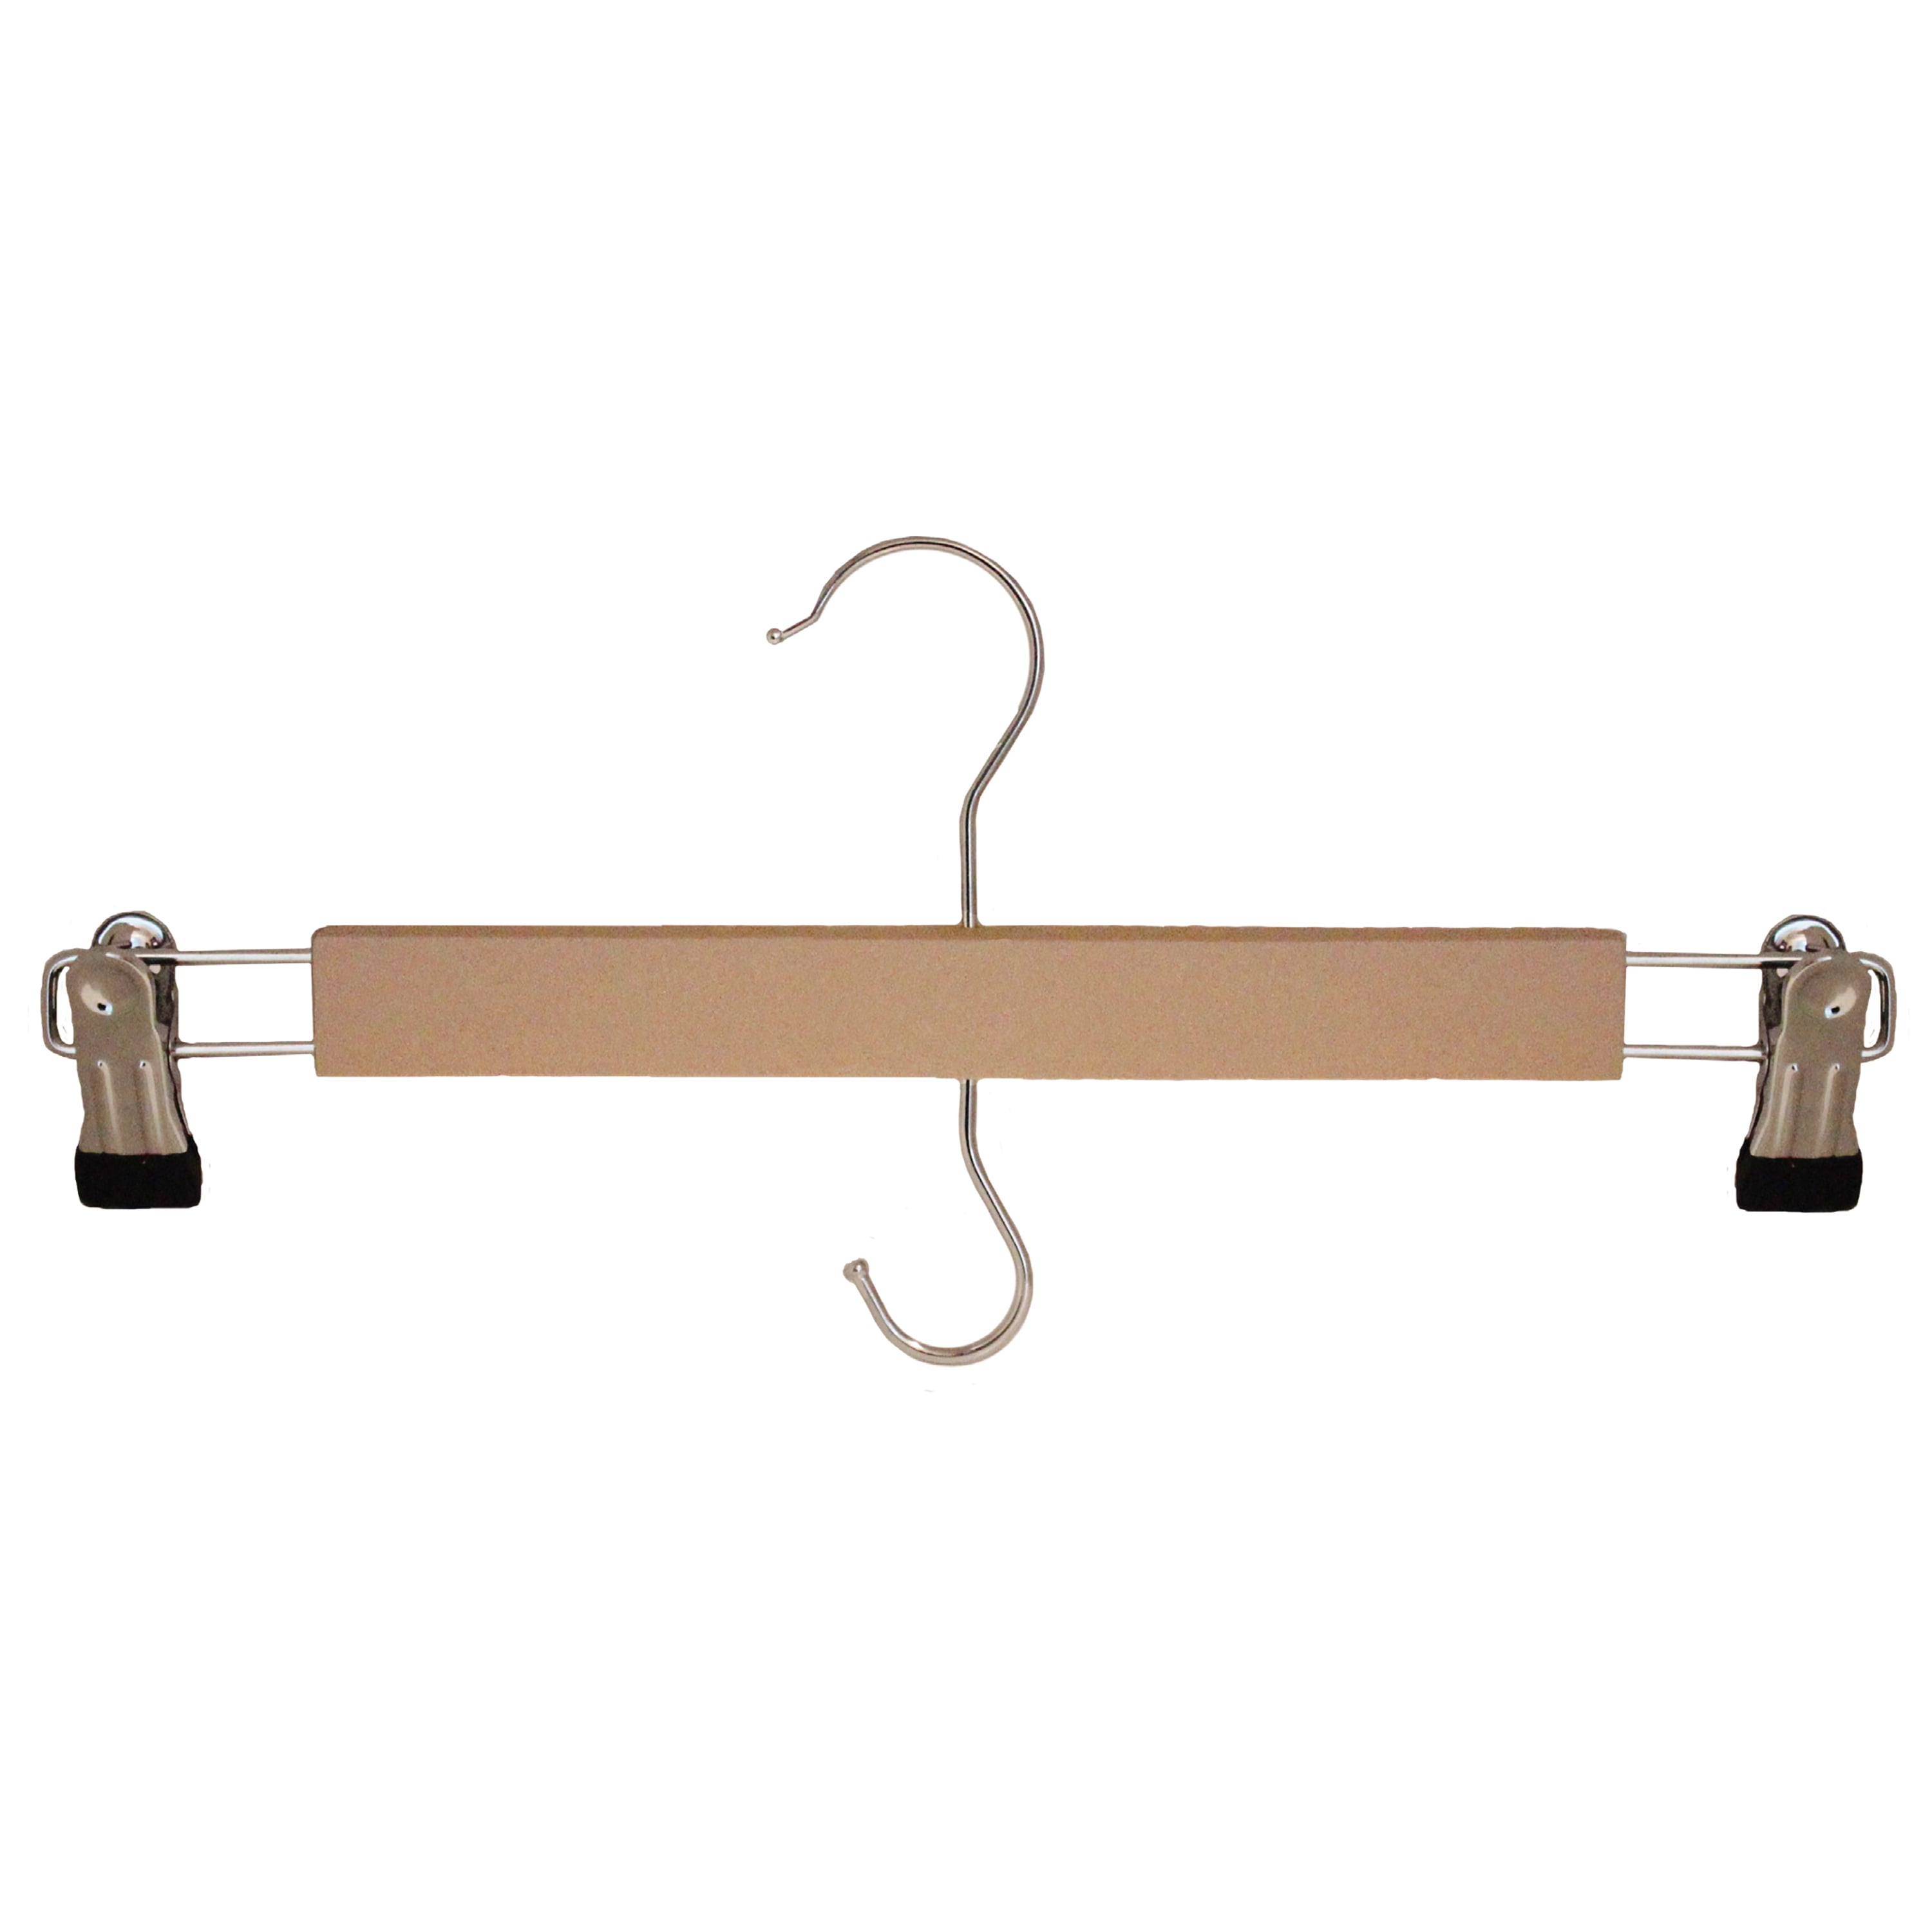 High-Grade Wooden Pants Hangers with Clips 10 Pack Non Slip Skirt Clamp Hangers. 